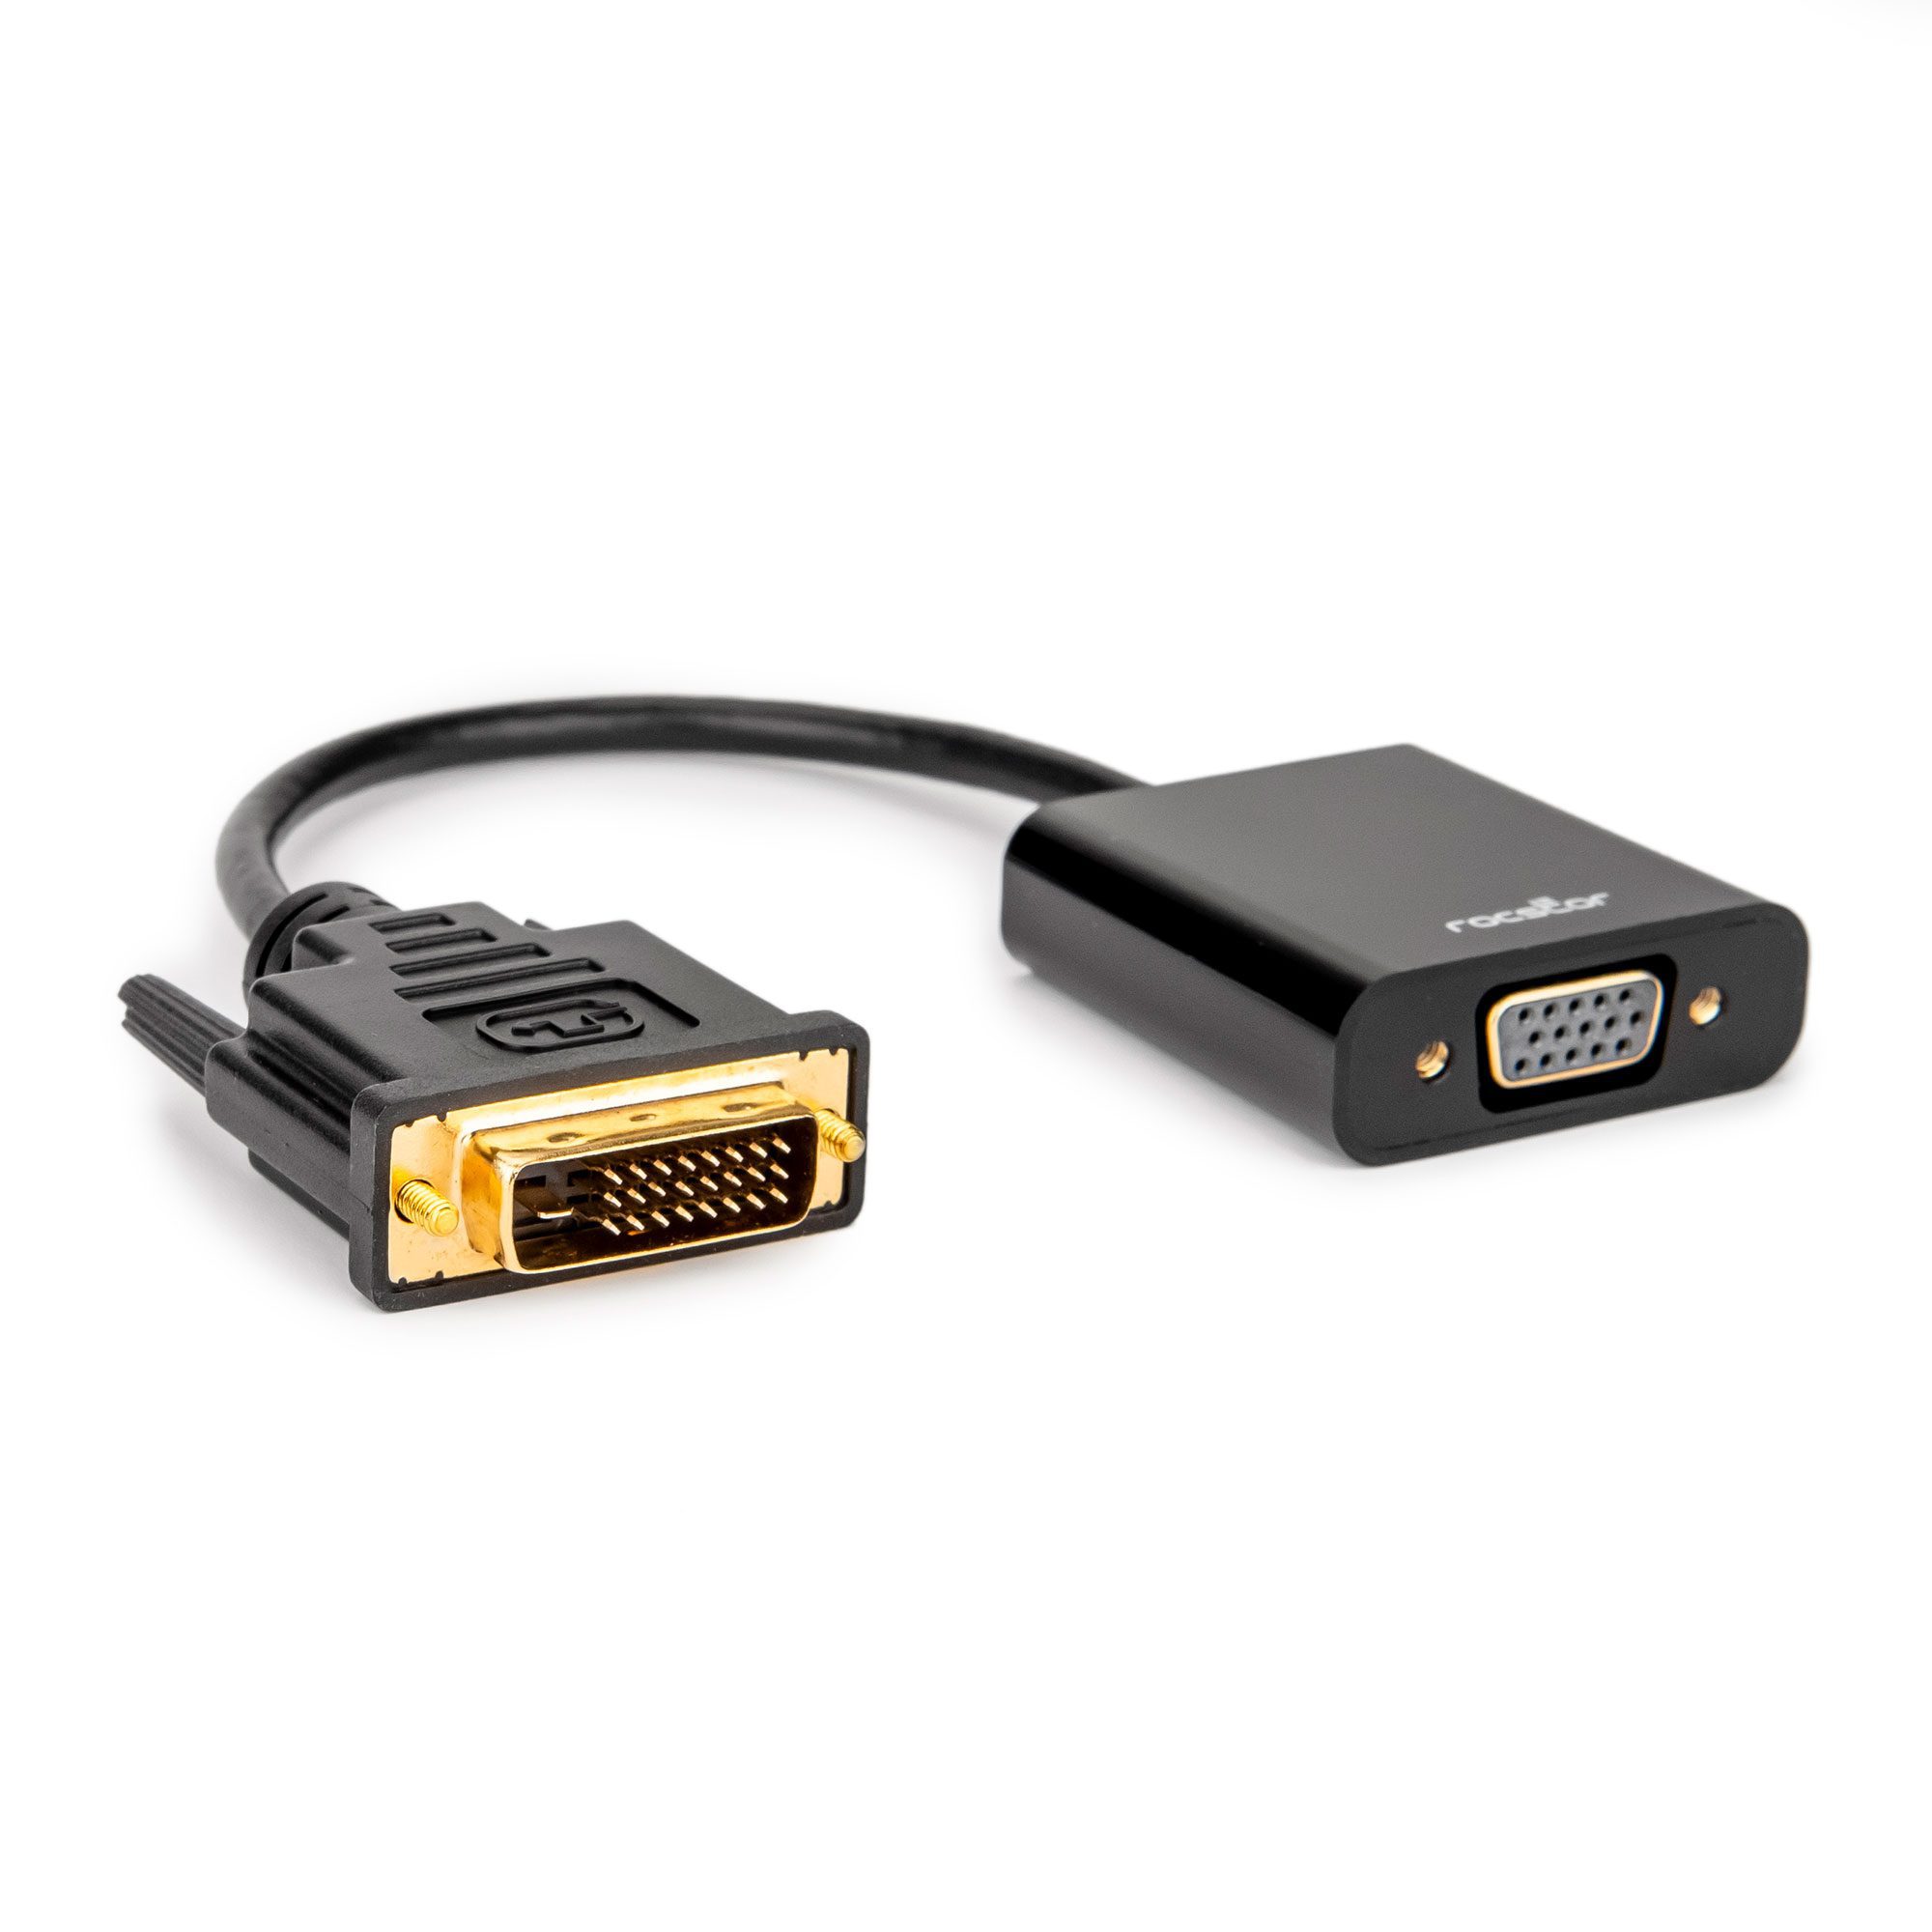 DVI-D to Active Video Adapter Supports up to 1920 1200